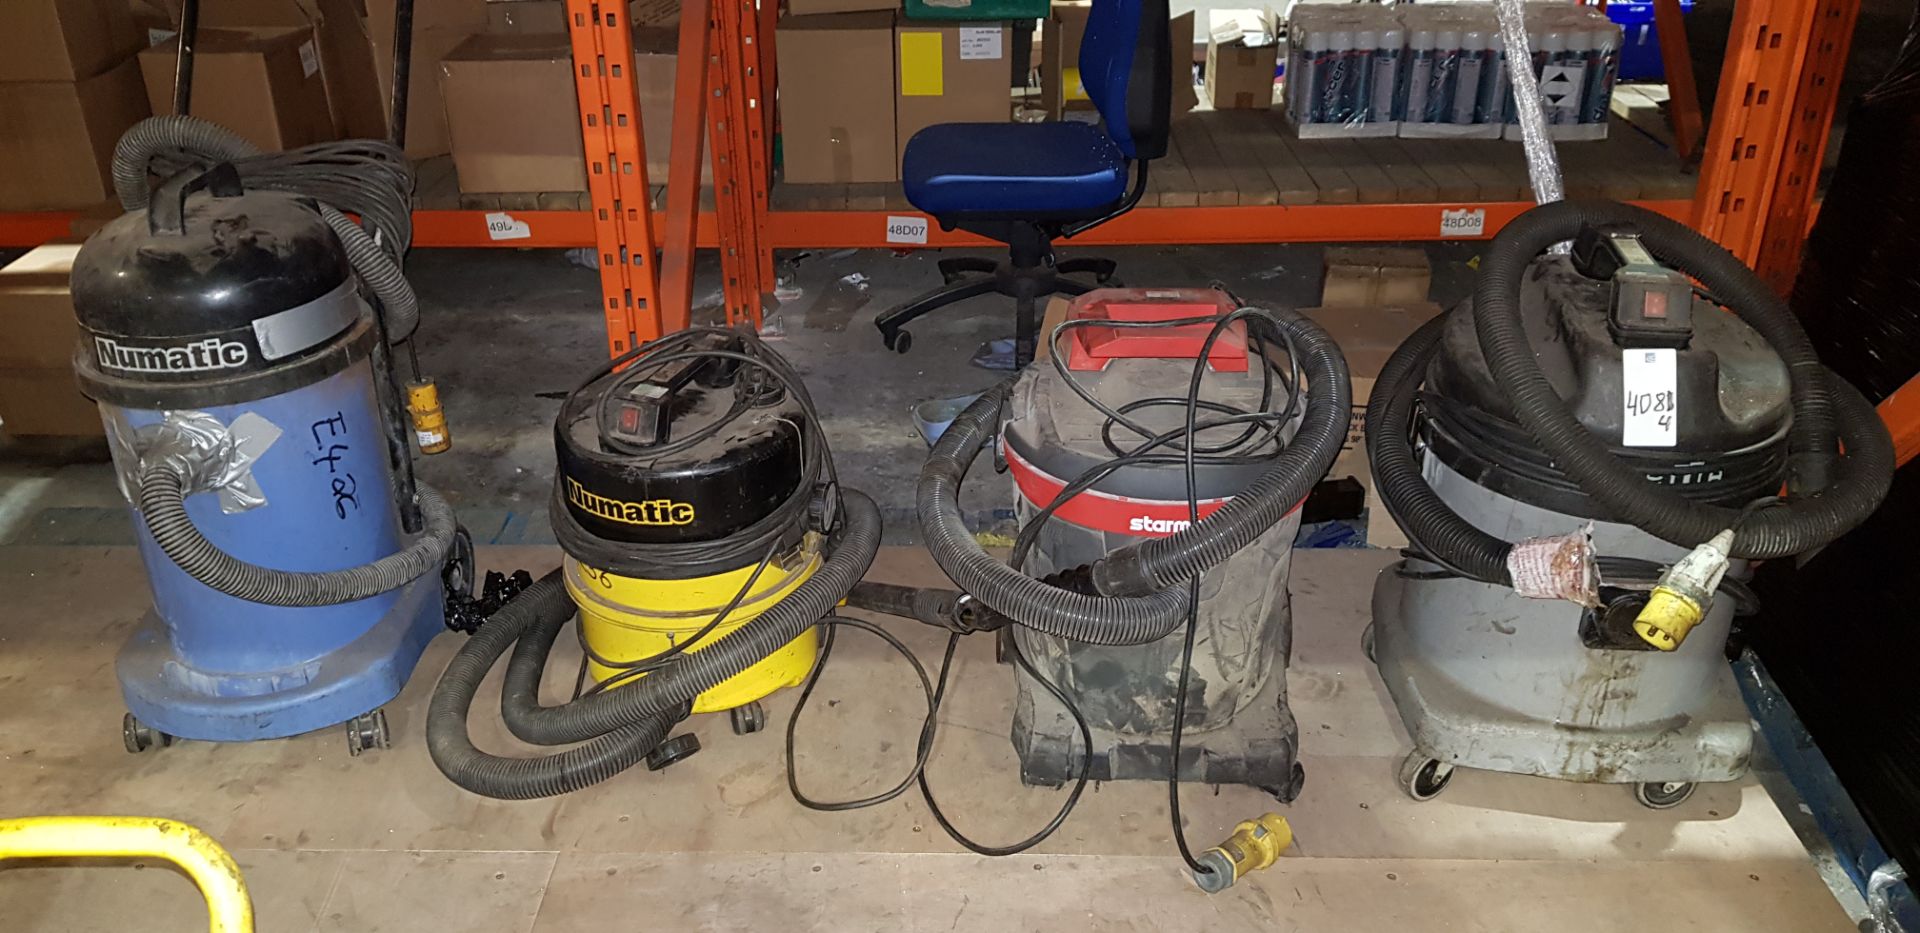 4 X MIXED INDUSTRIAL HOOVER LOT TO INCLUDE 3X NUMATIC HOOVERS AND 1X STARMIX HOOVER